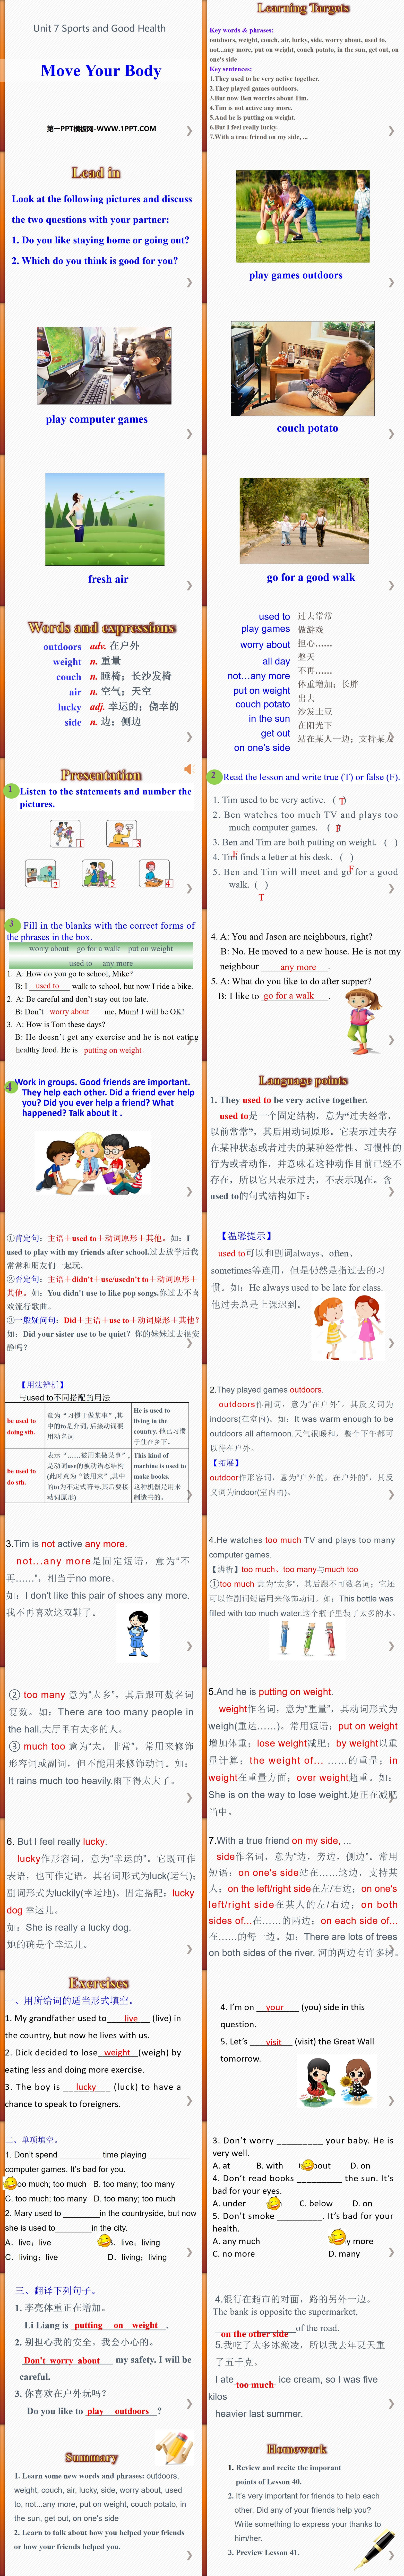 《Move Your Body》Sports and Good Health PPT教学课件
（2）